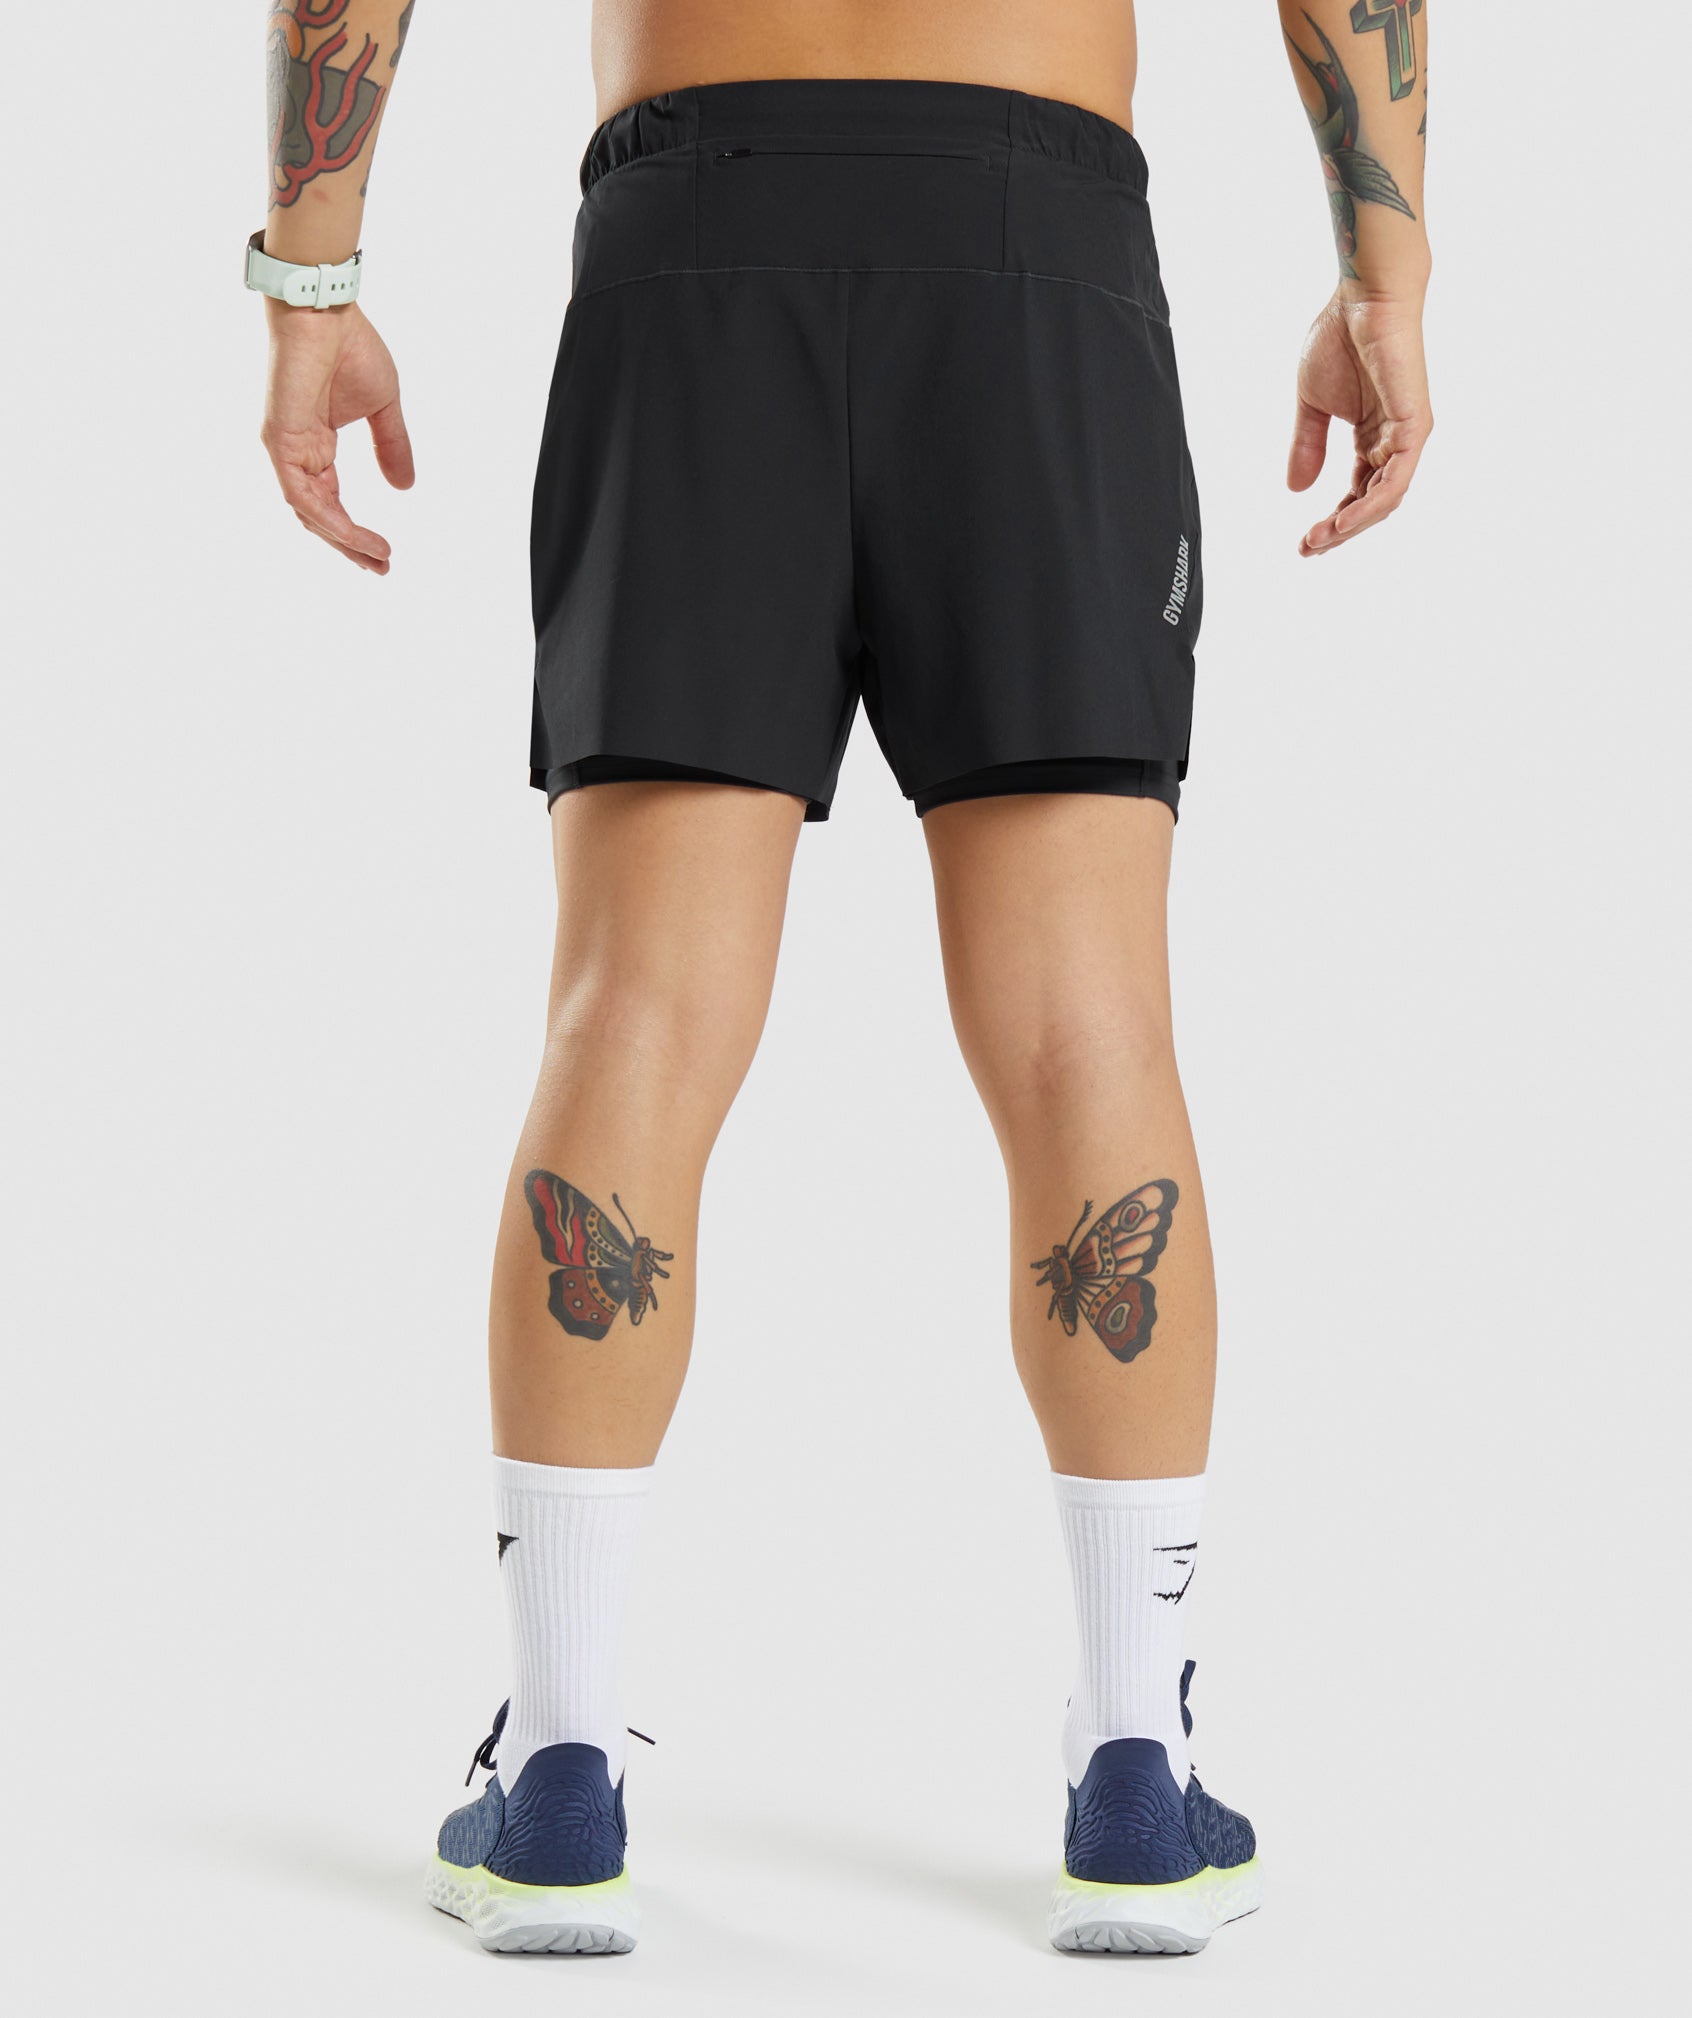 Speed 5" 2 In 1 Shorts in Black - view 2